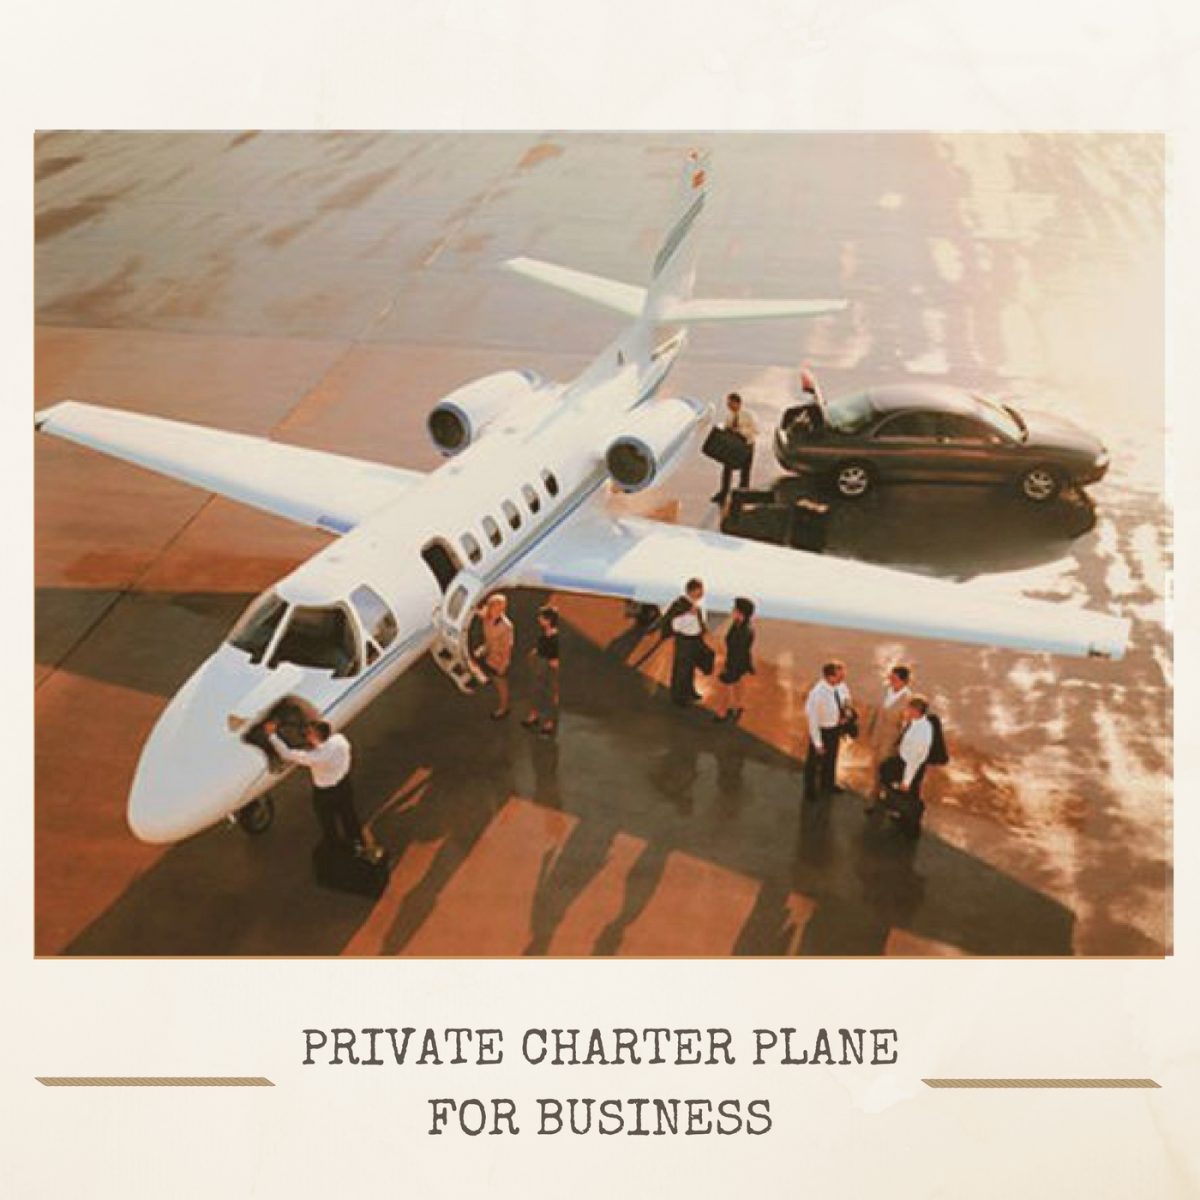 Rent a Private charter Plane for Business Purpose